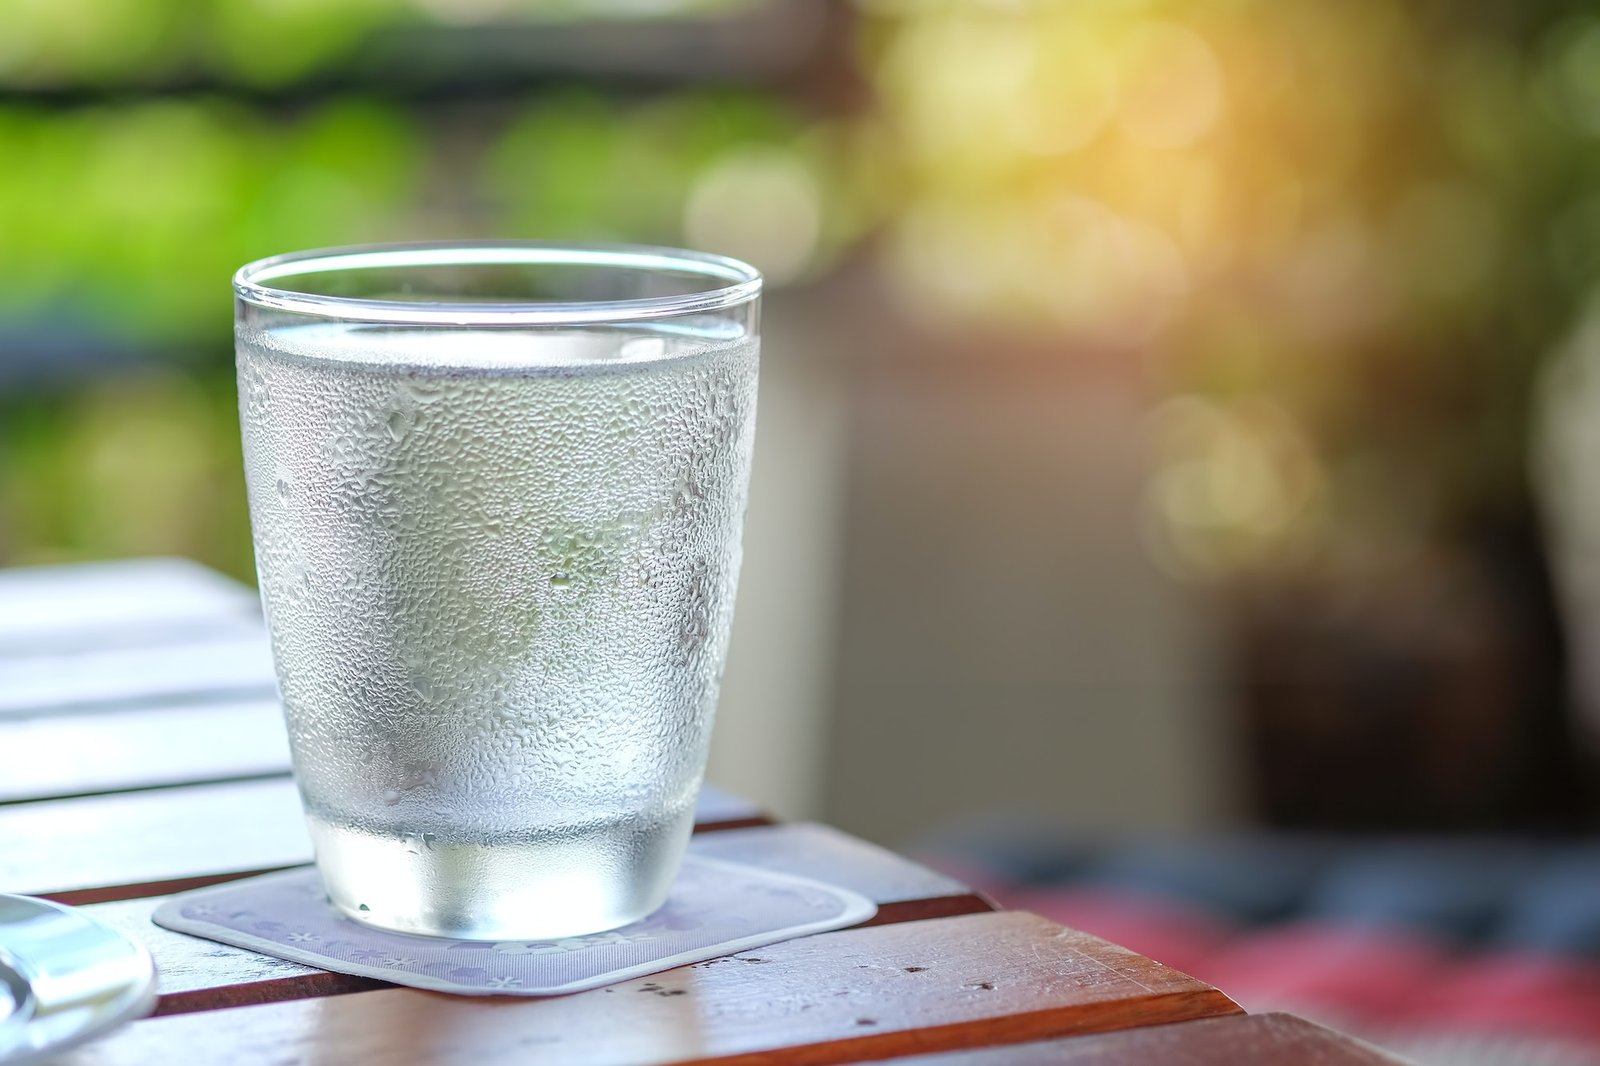 Water glass on wooden table.